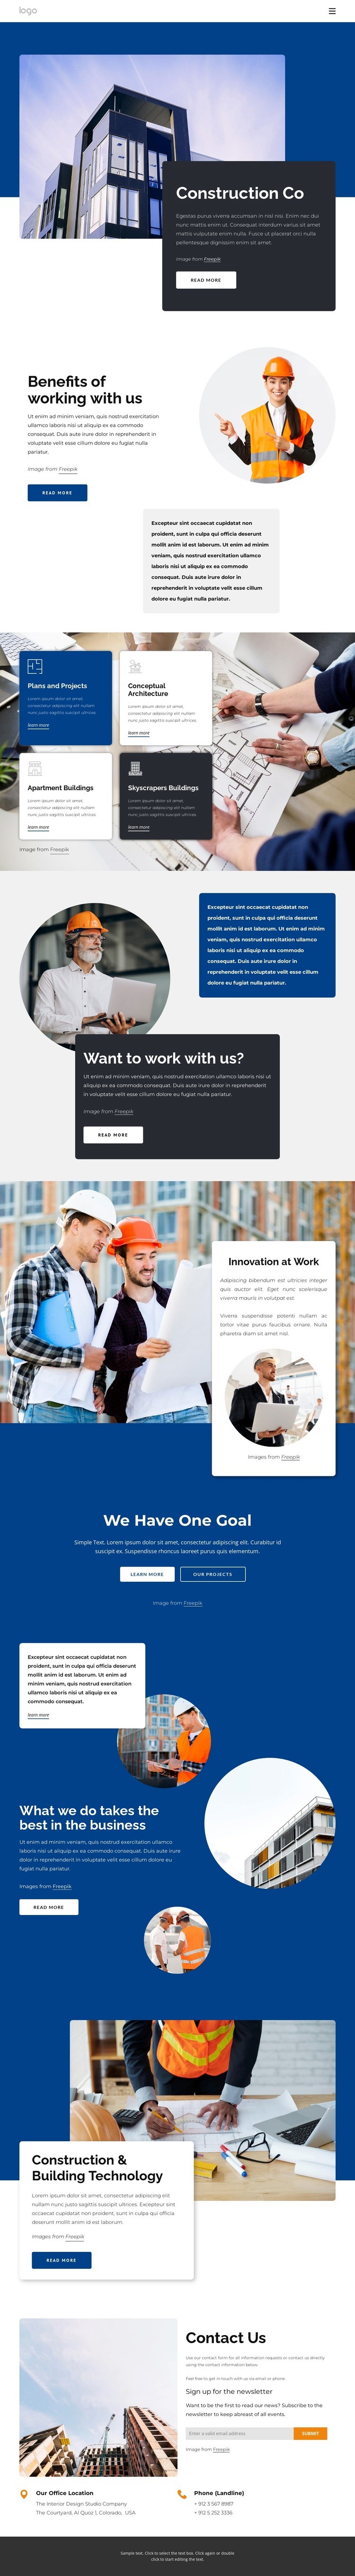 Construction co Homepage Design